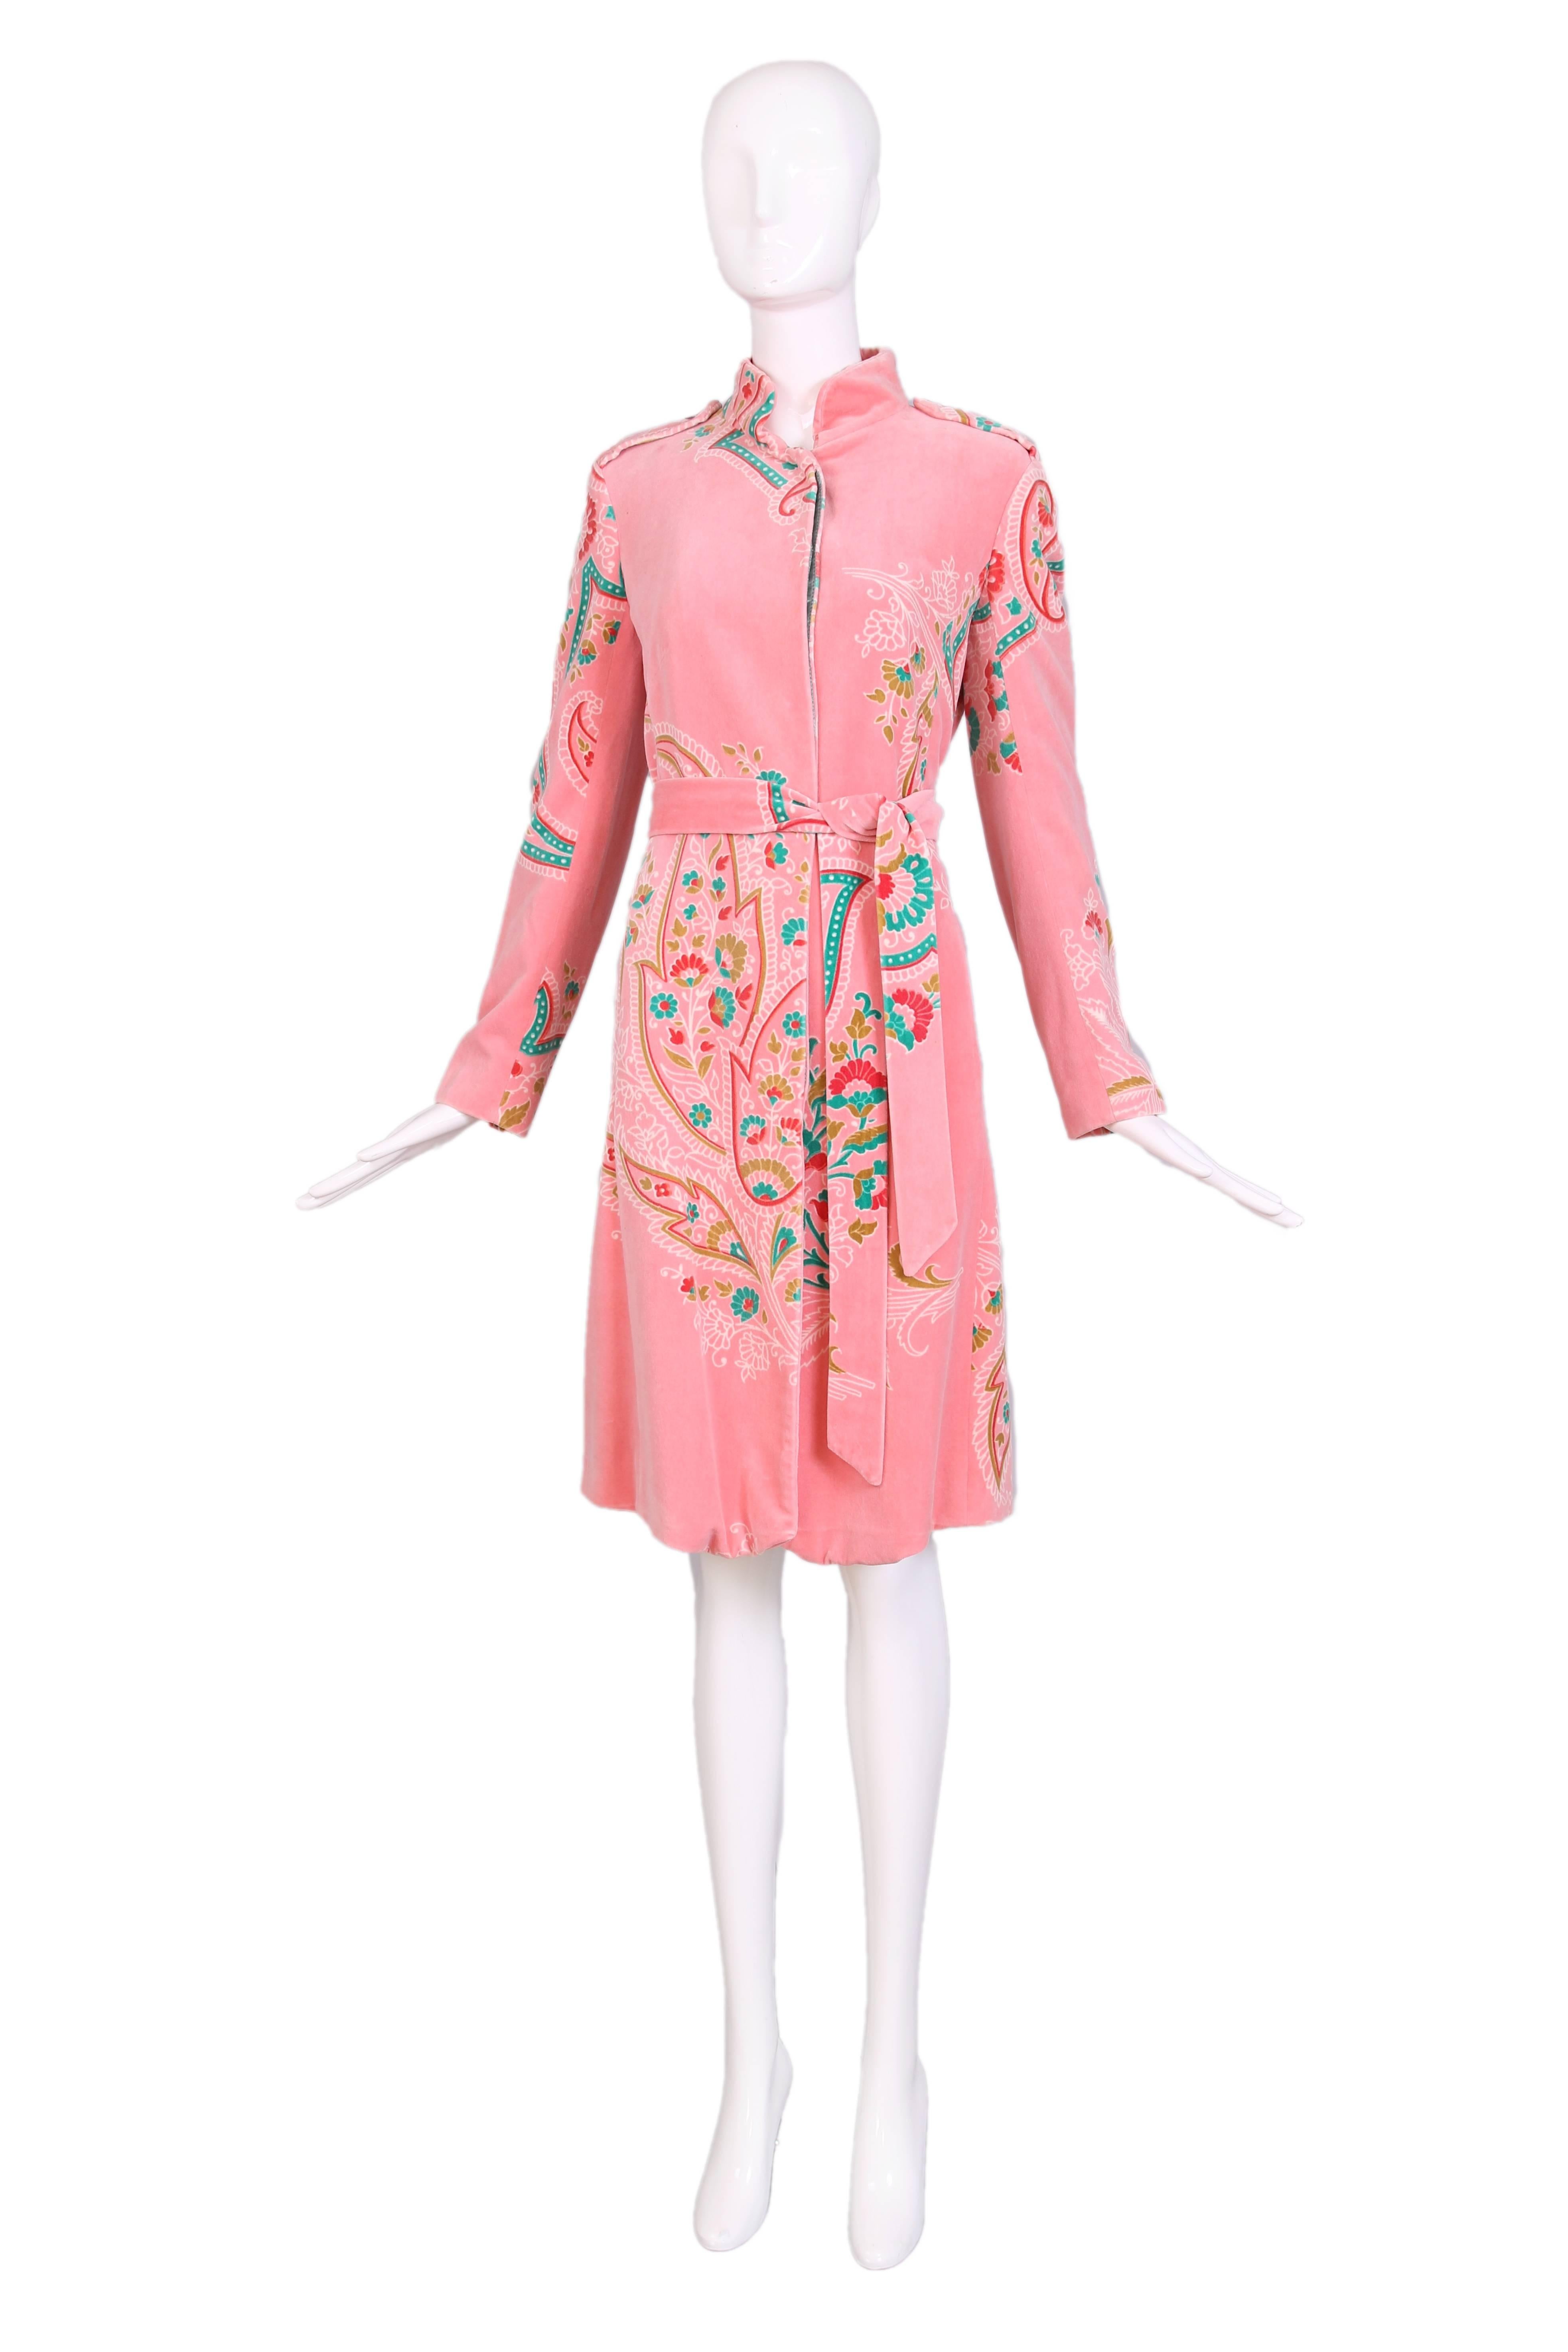 A Matthew Williamson pink velvet belted coat w/floral print. In excellent condition. No size tag - fits approximately a size 6, please consult measurements.
MEASUREMENTS:
Bust - 38"
Waist - 34"
Hips - 42"
Length - 40"